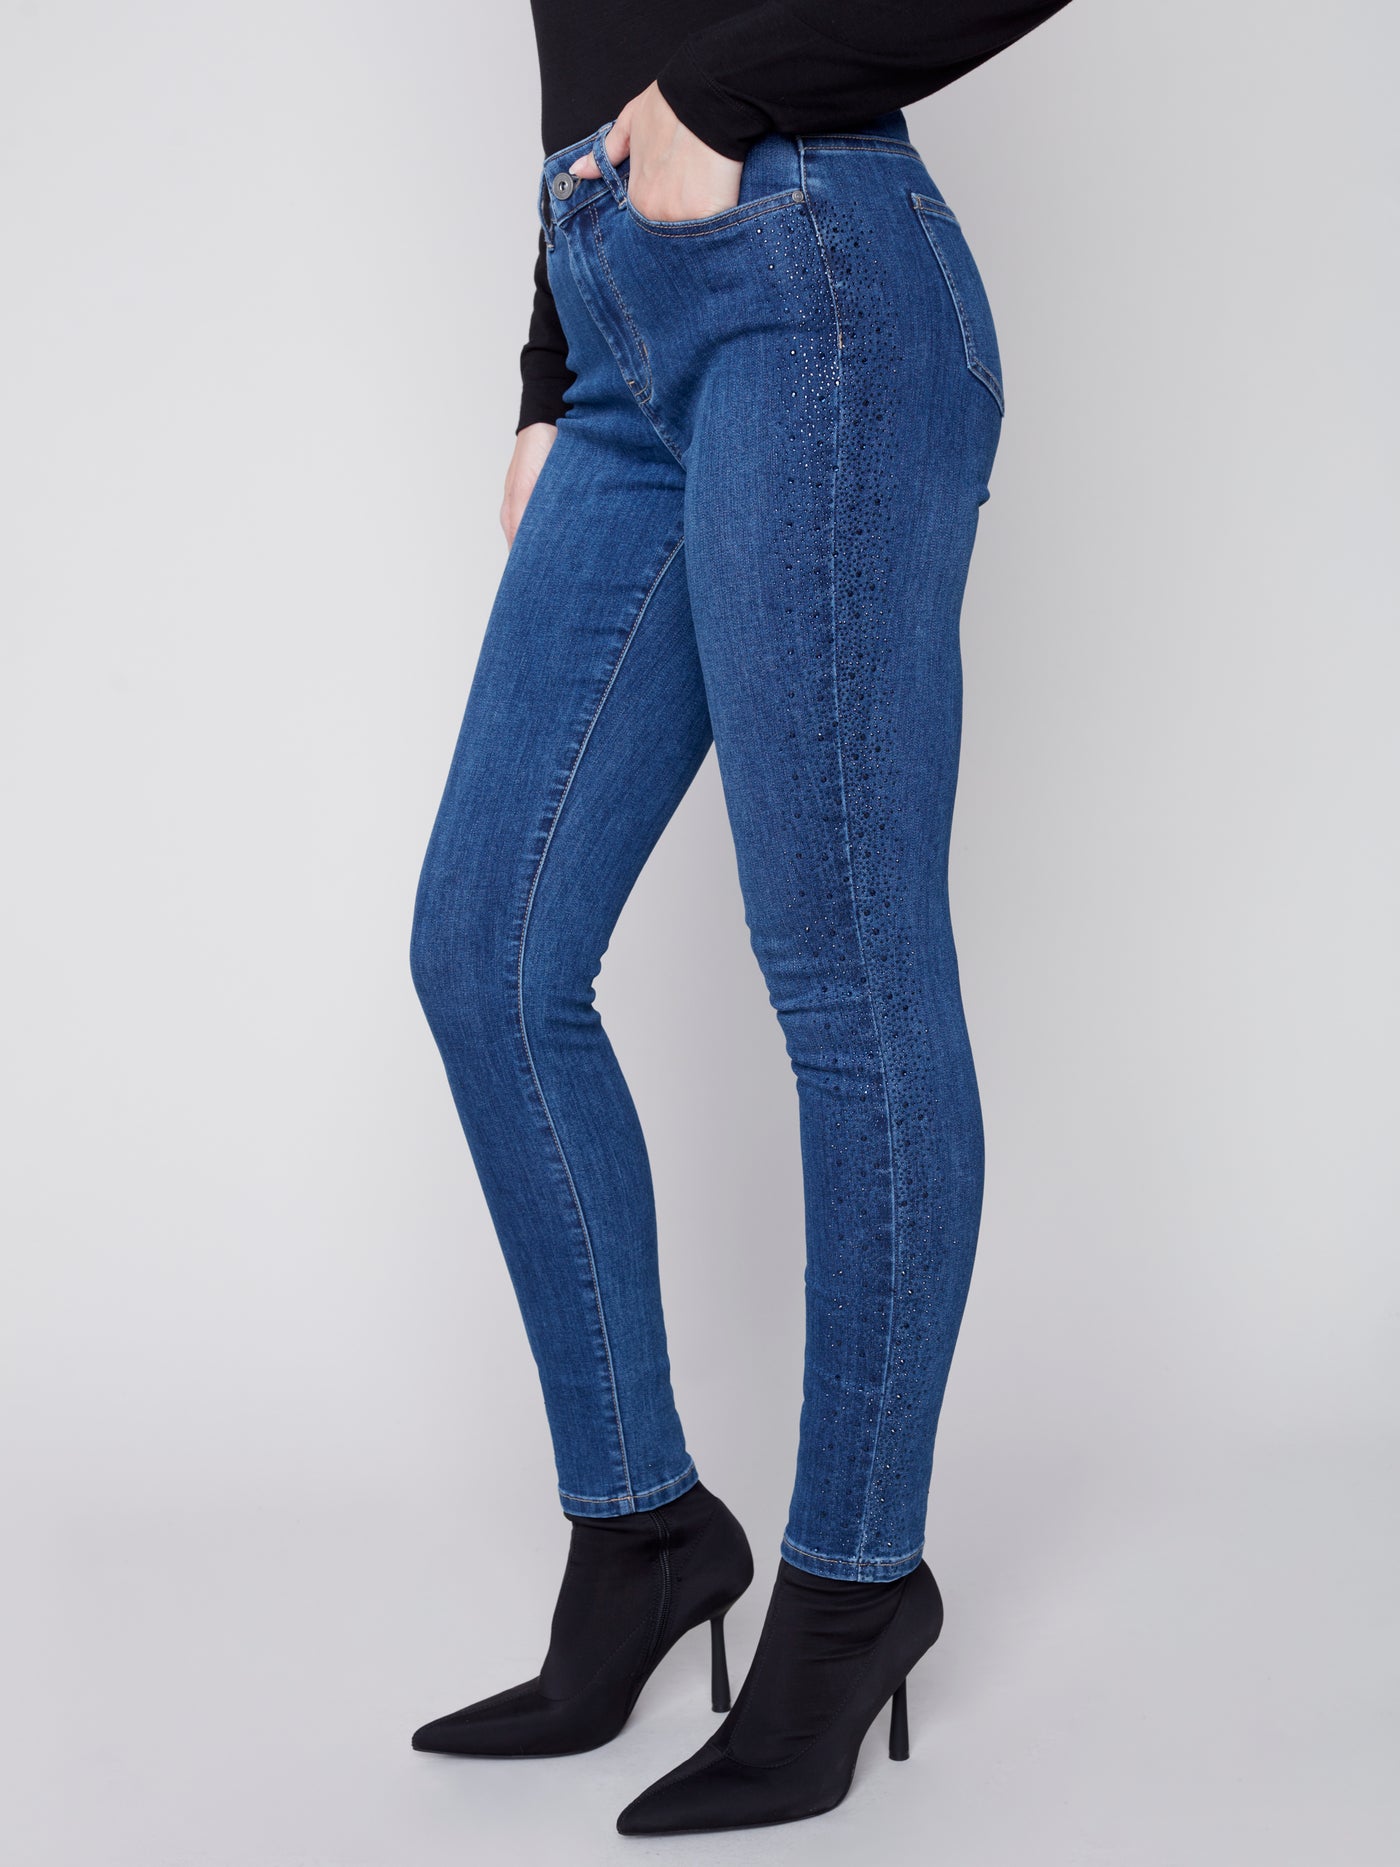 Blue Skinny Leg Jean with Crystals